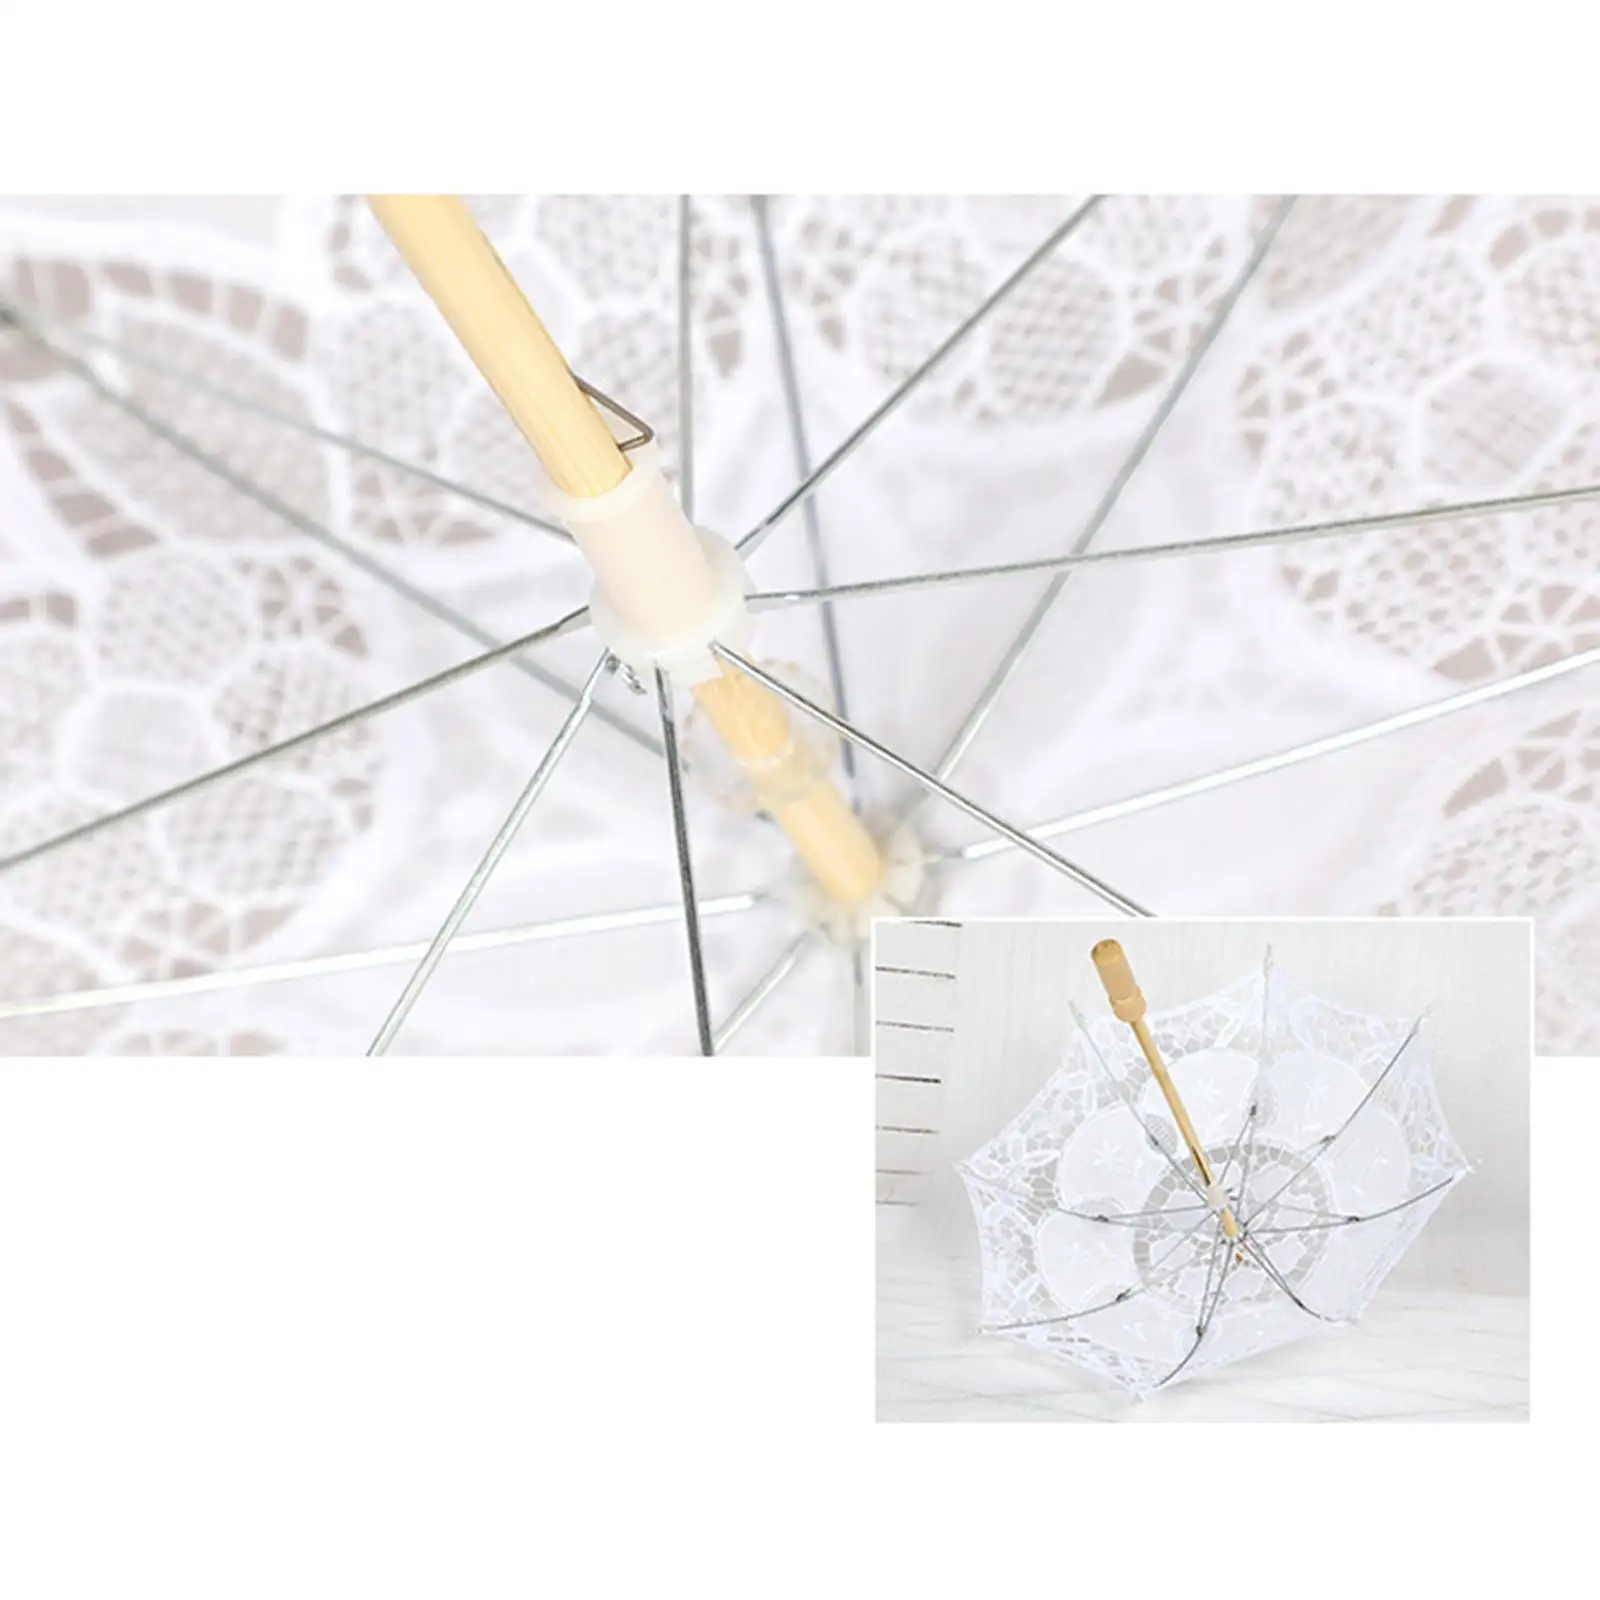 Elegant Lace Parasol with Wooden Handle for Special Occasions